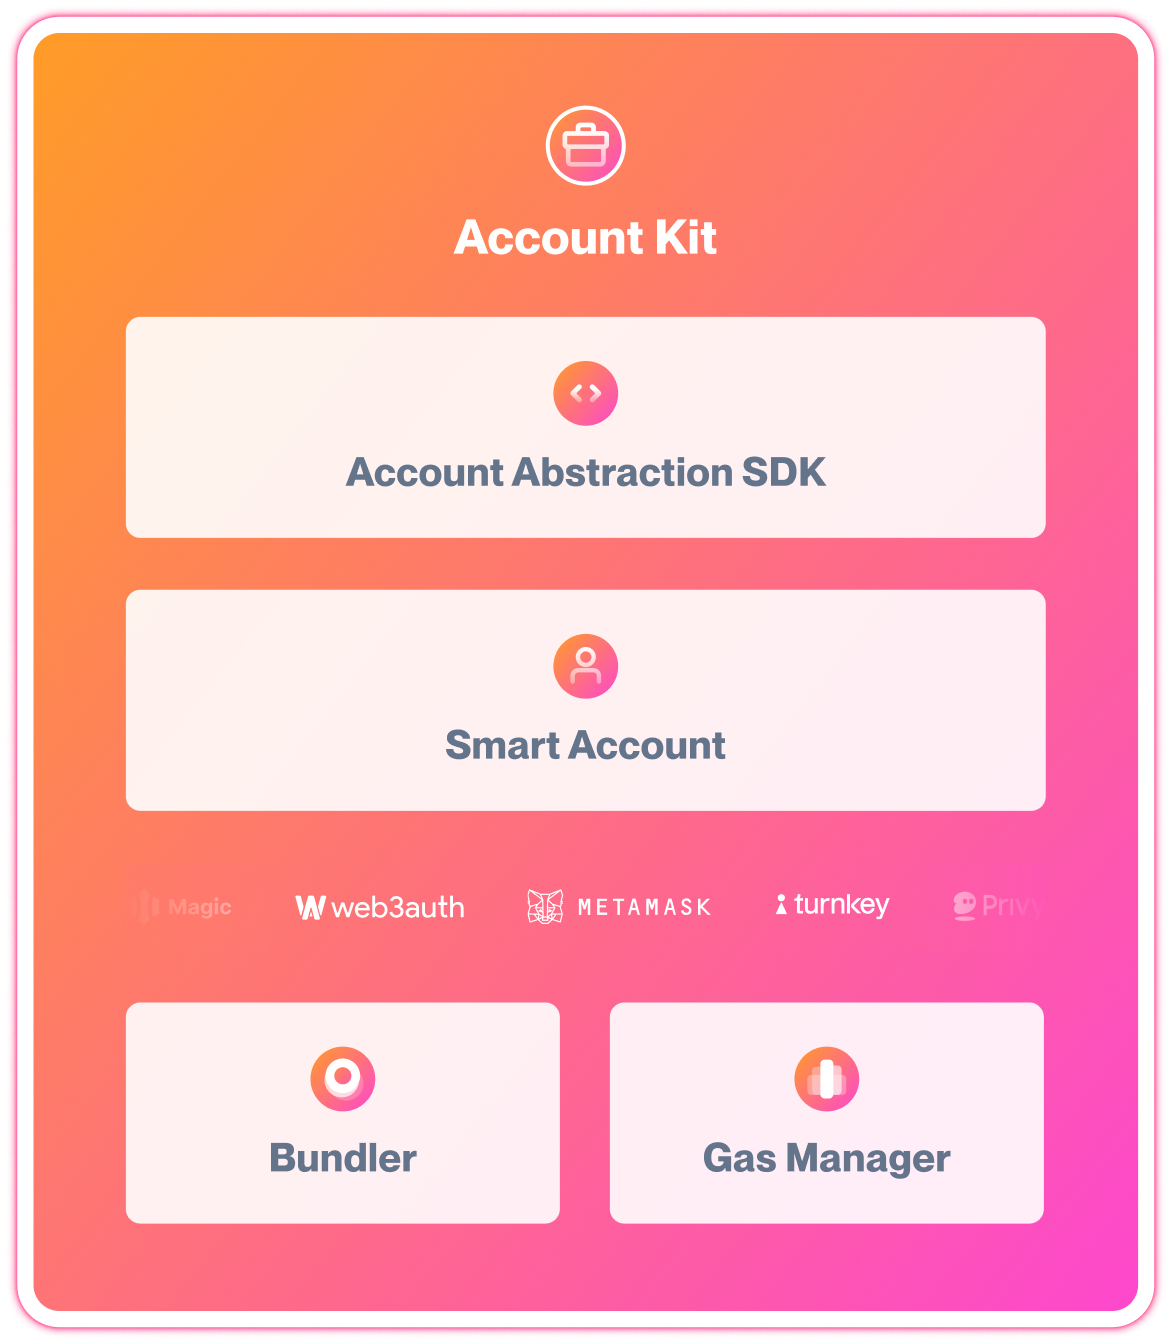 Account Kit product suite